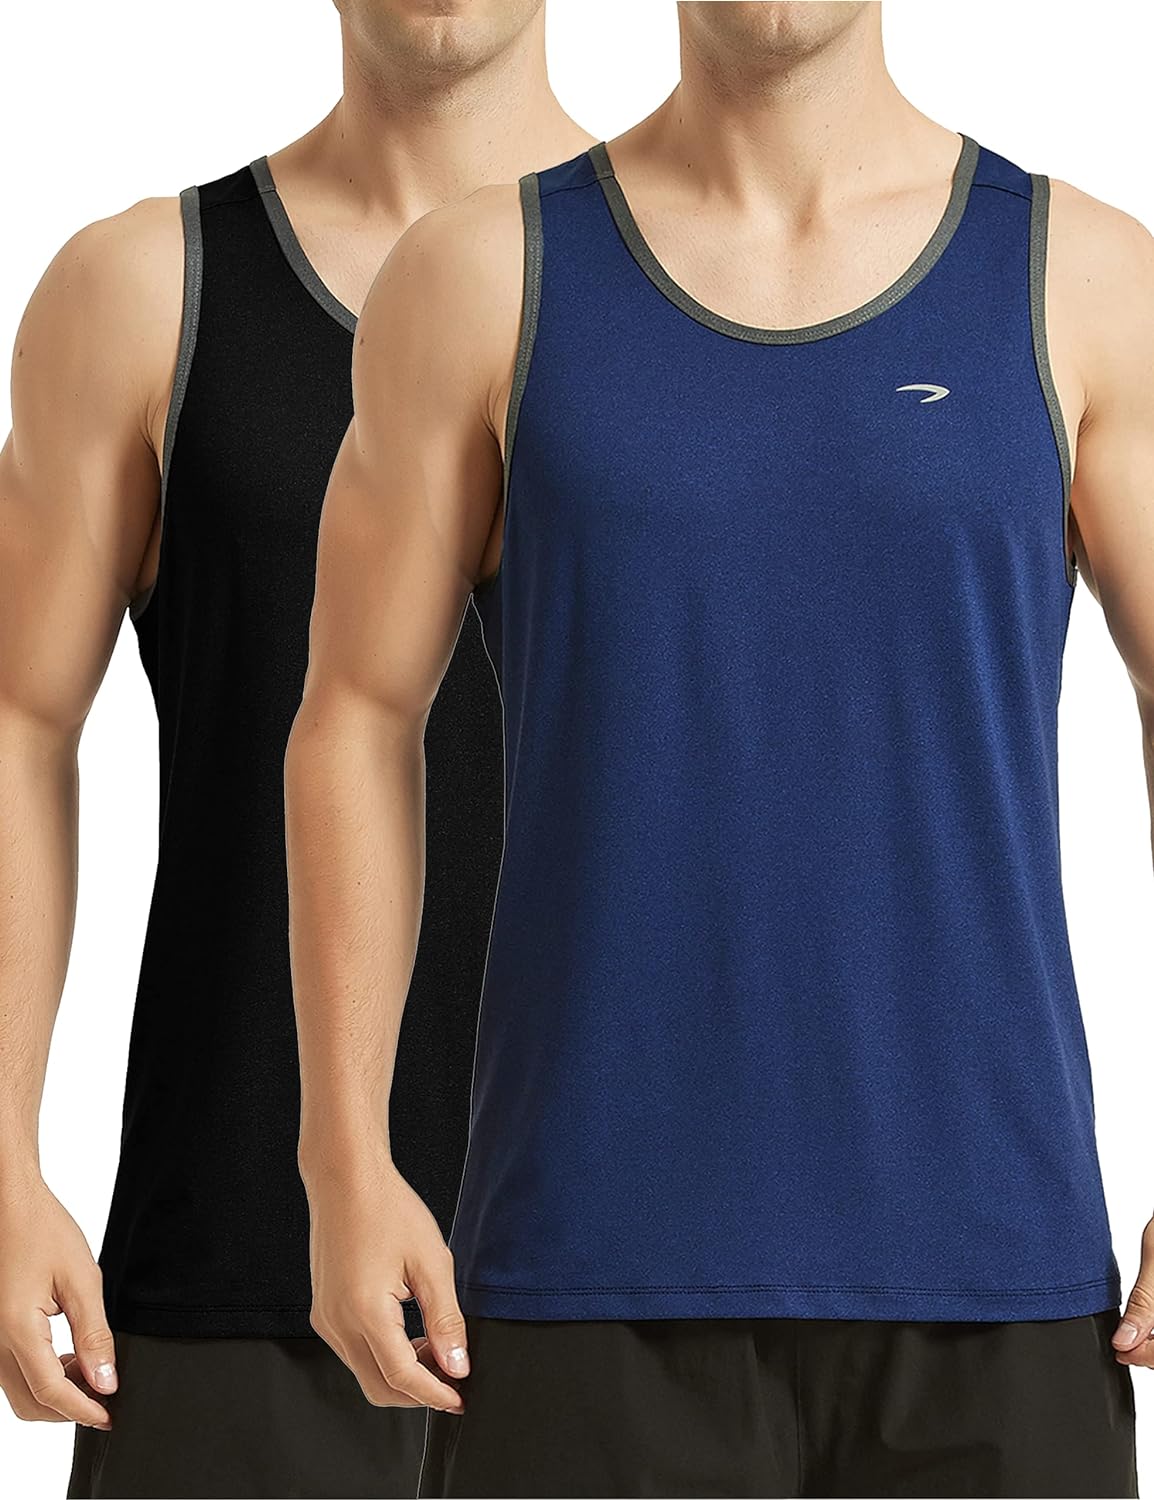 KPSUN Mens Quick Dry Sports Tank Tops Athletic Gym Bodybuilding Fitness Sleeveless Shirts for Beach Running Workout